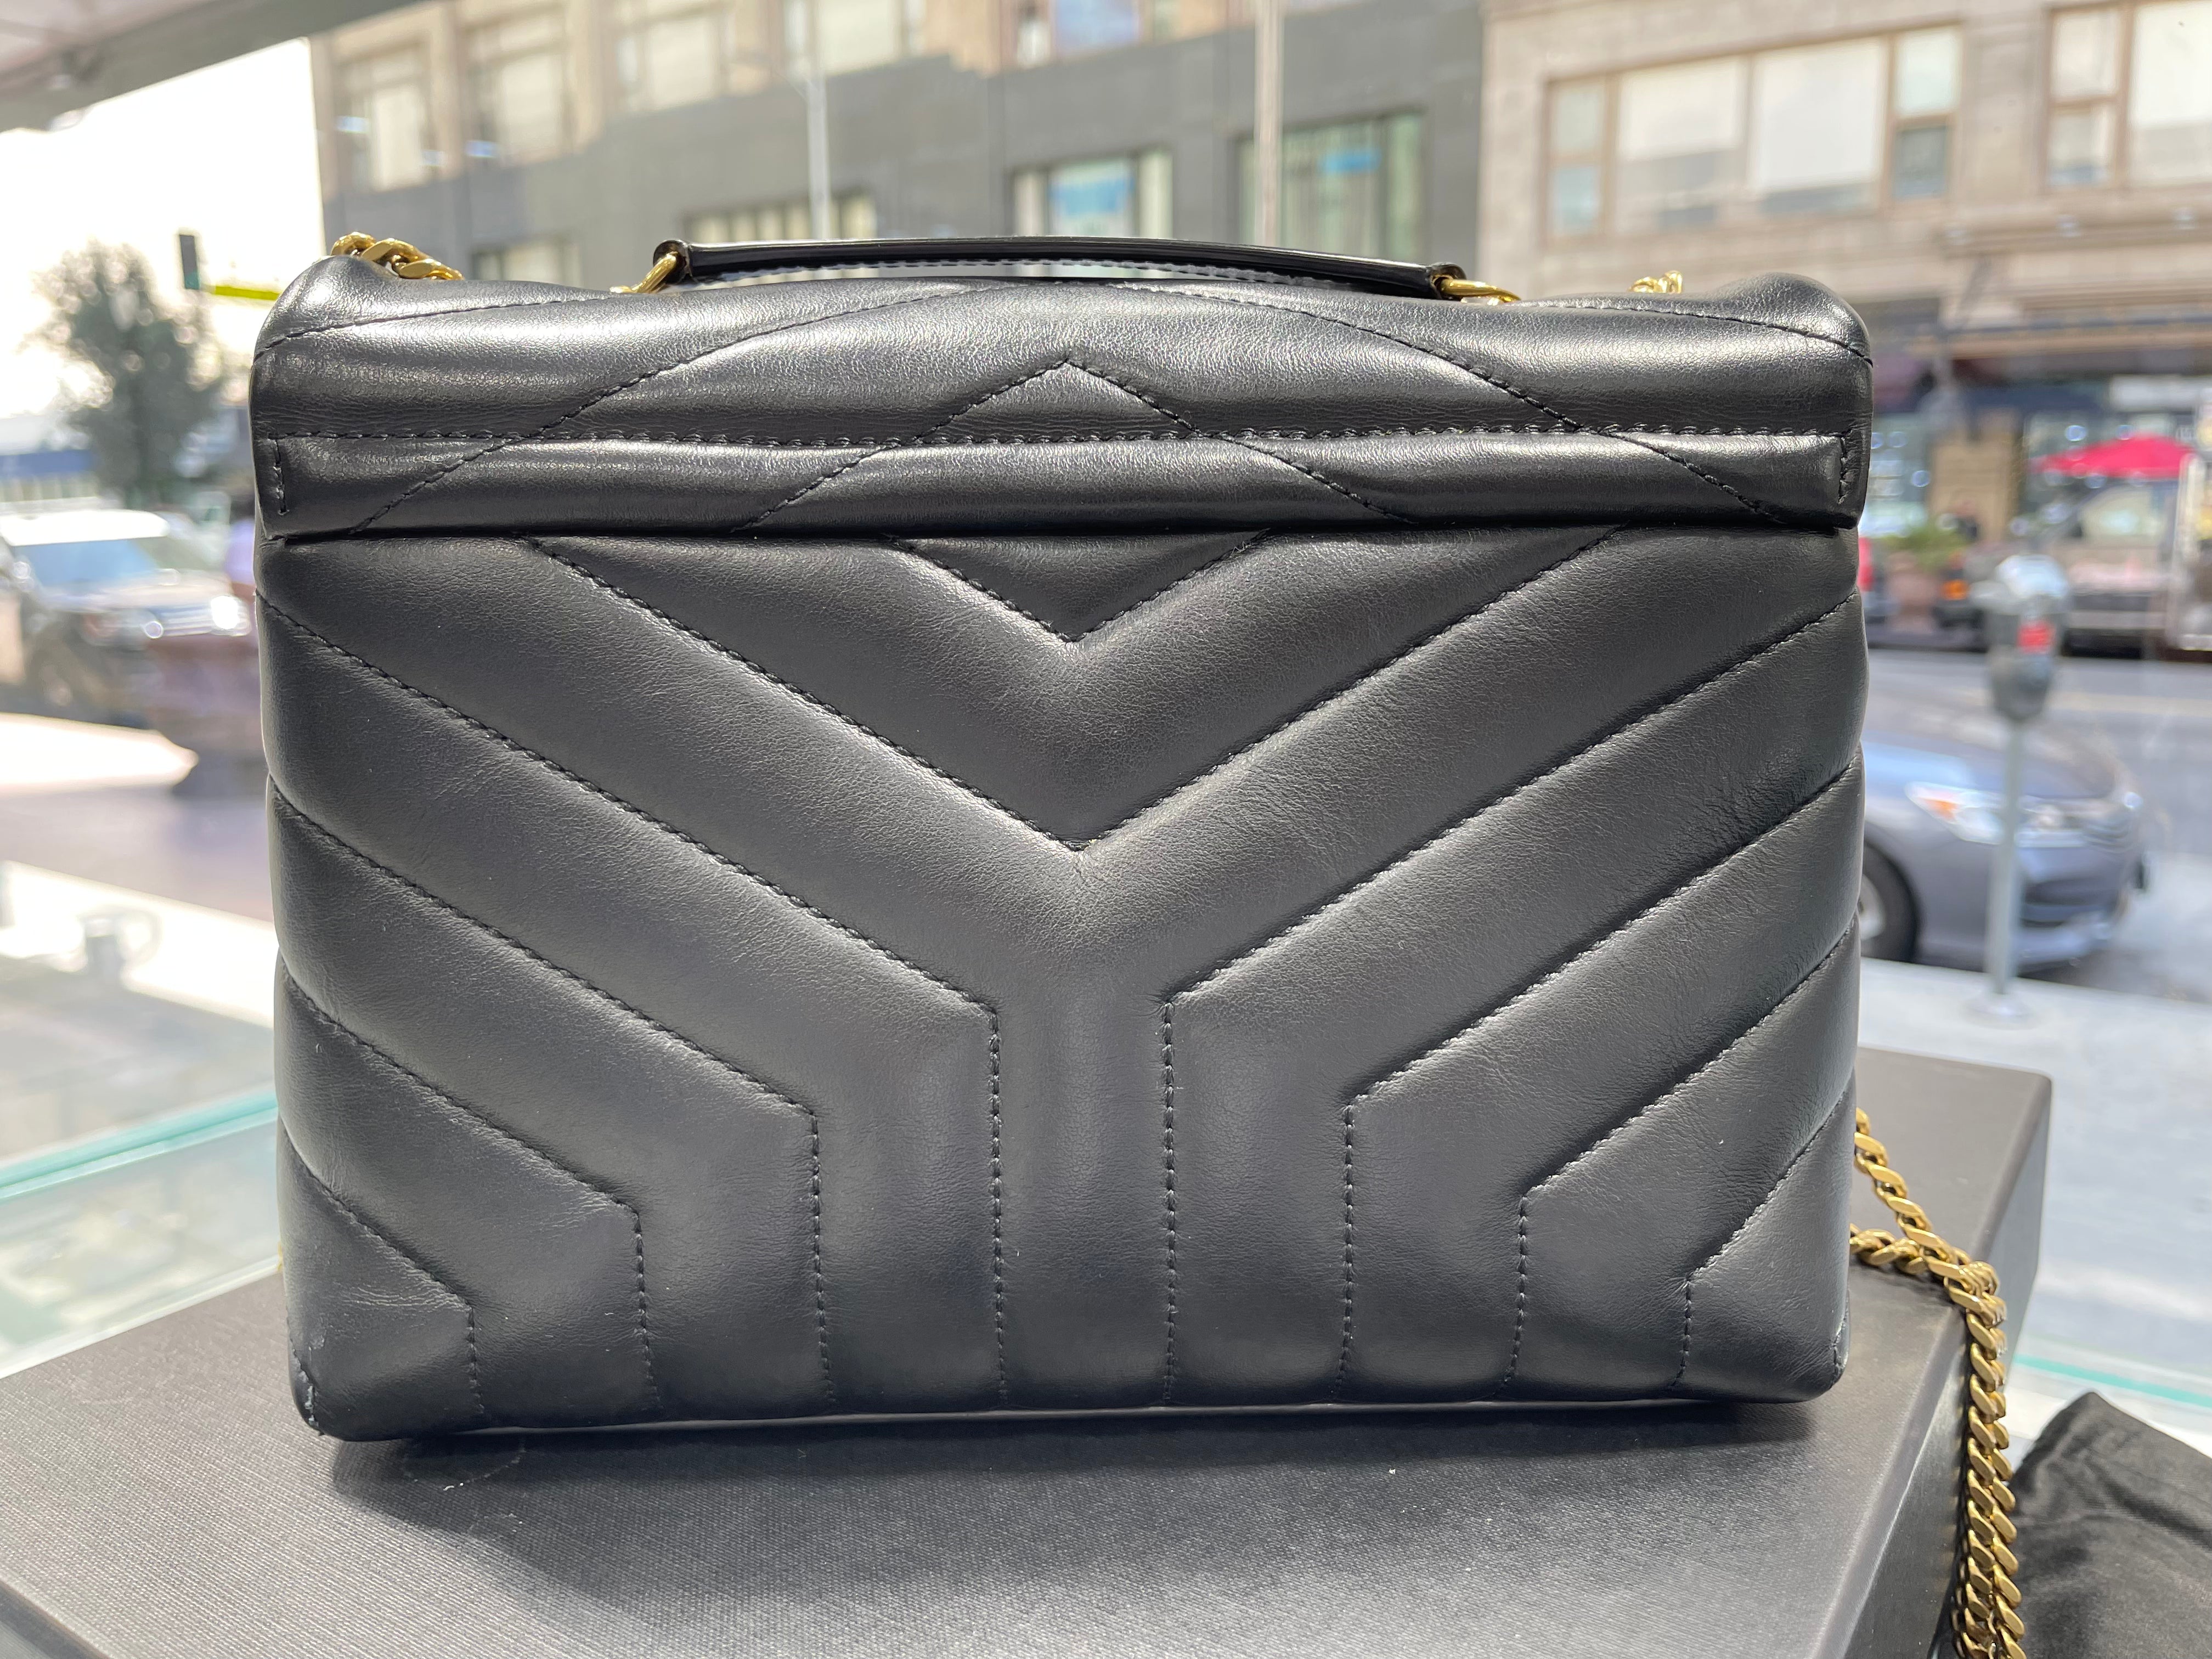 Saint Laurent - Authenticated Loulou Puffer Handbag - Leather Grey Plain for Women, Very Good Condition